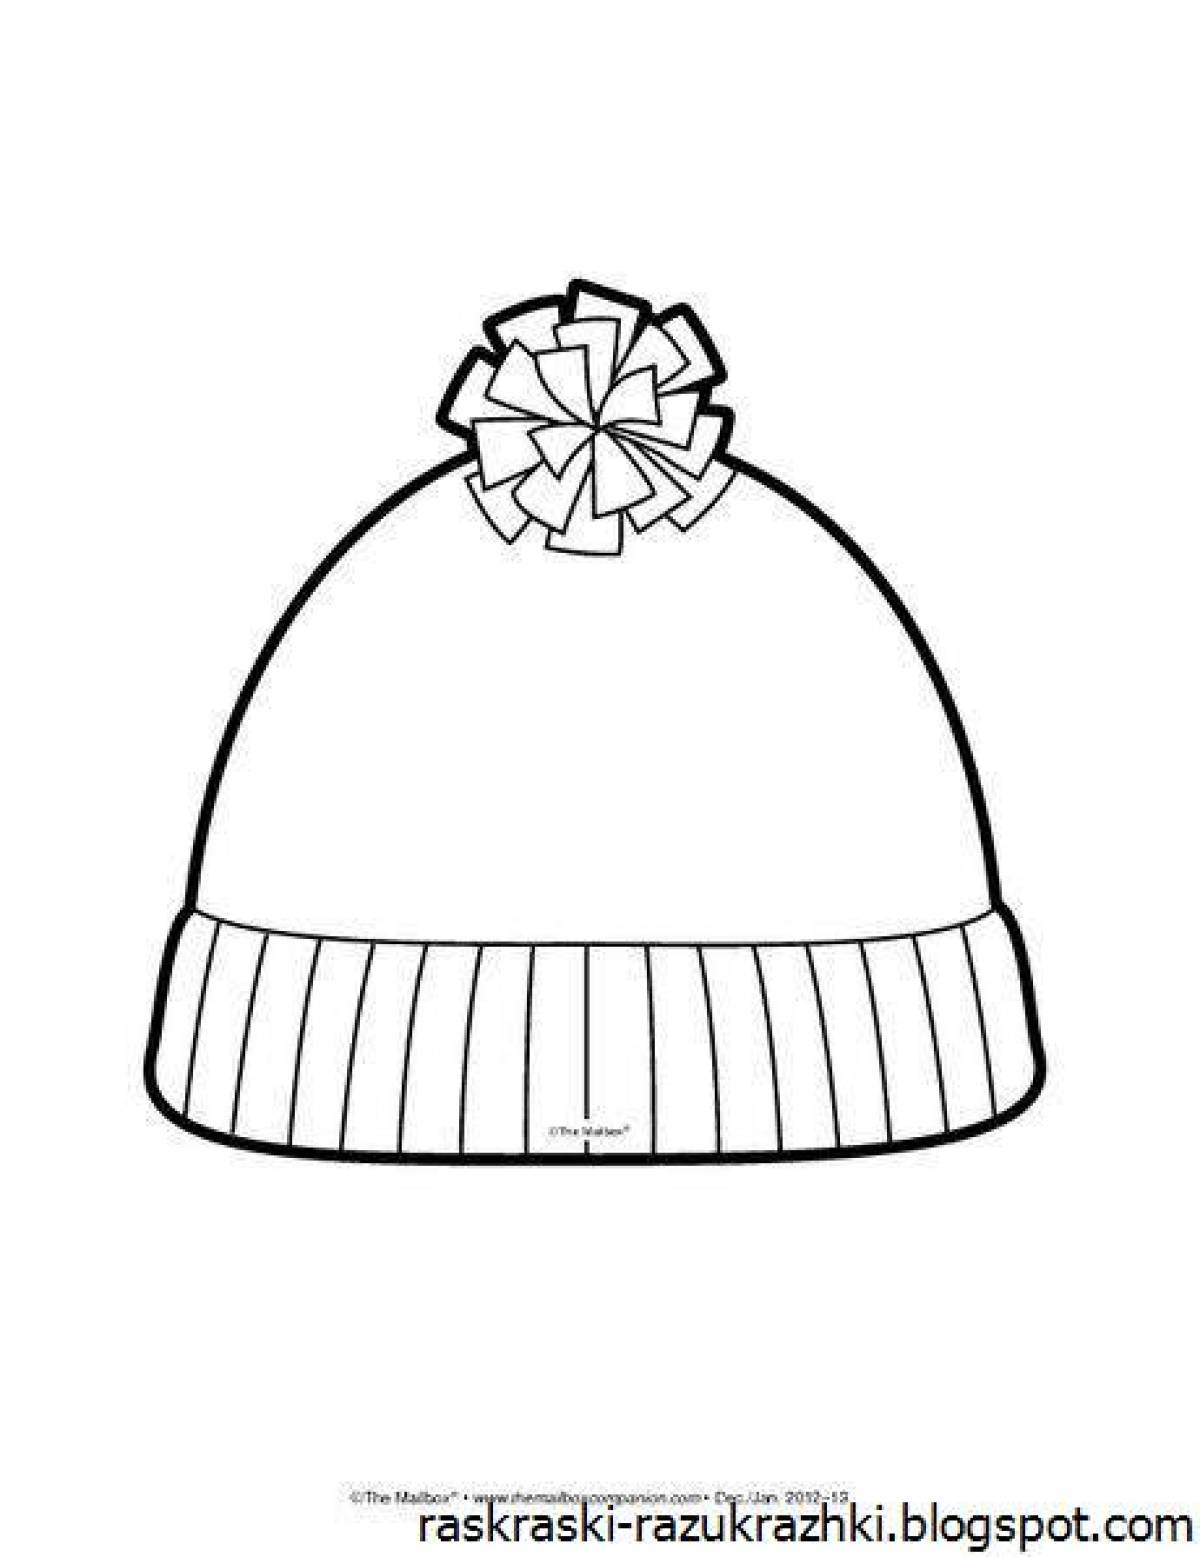 A fun hat coloring book for kids